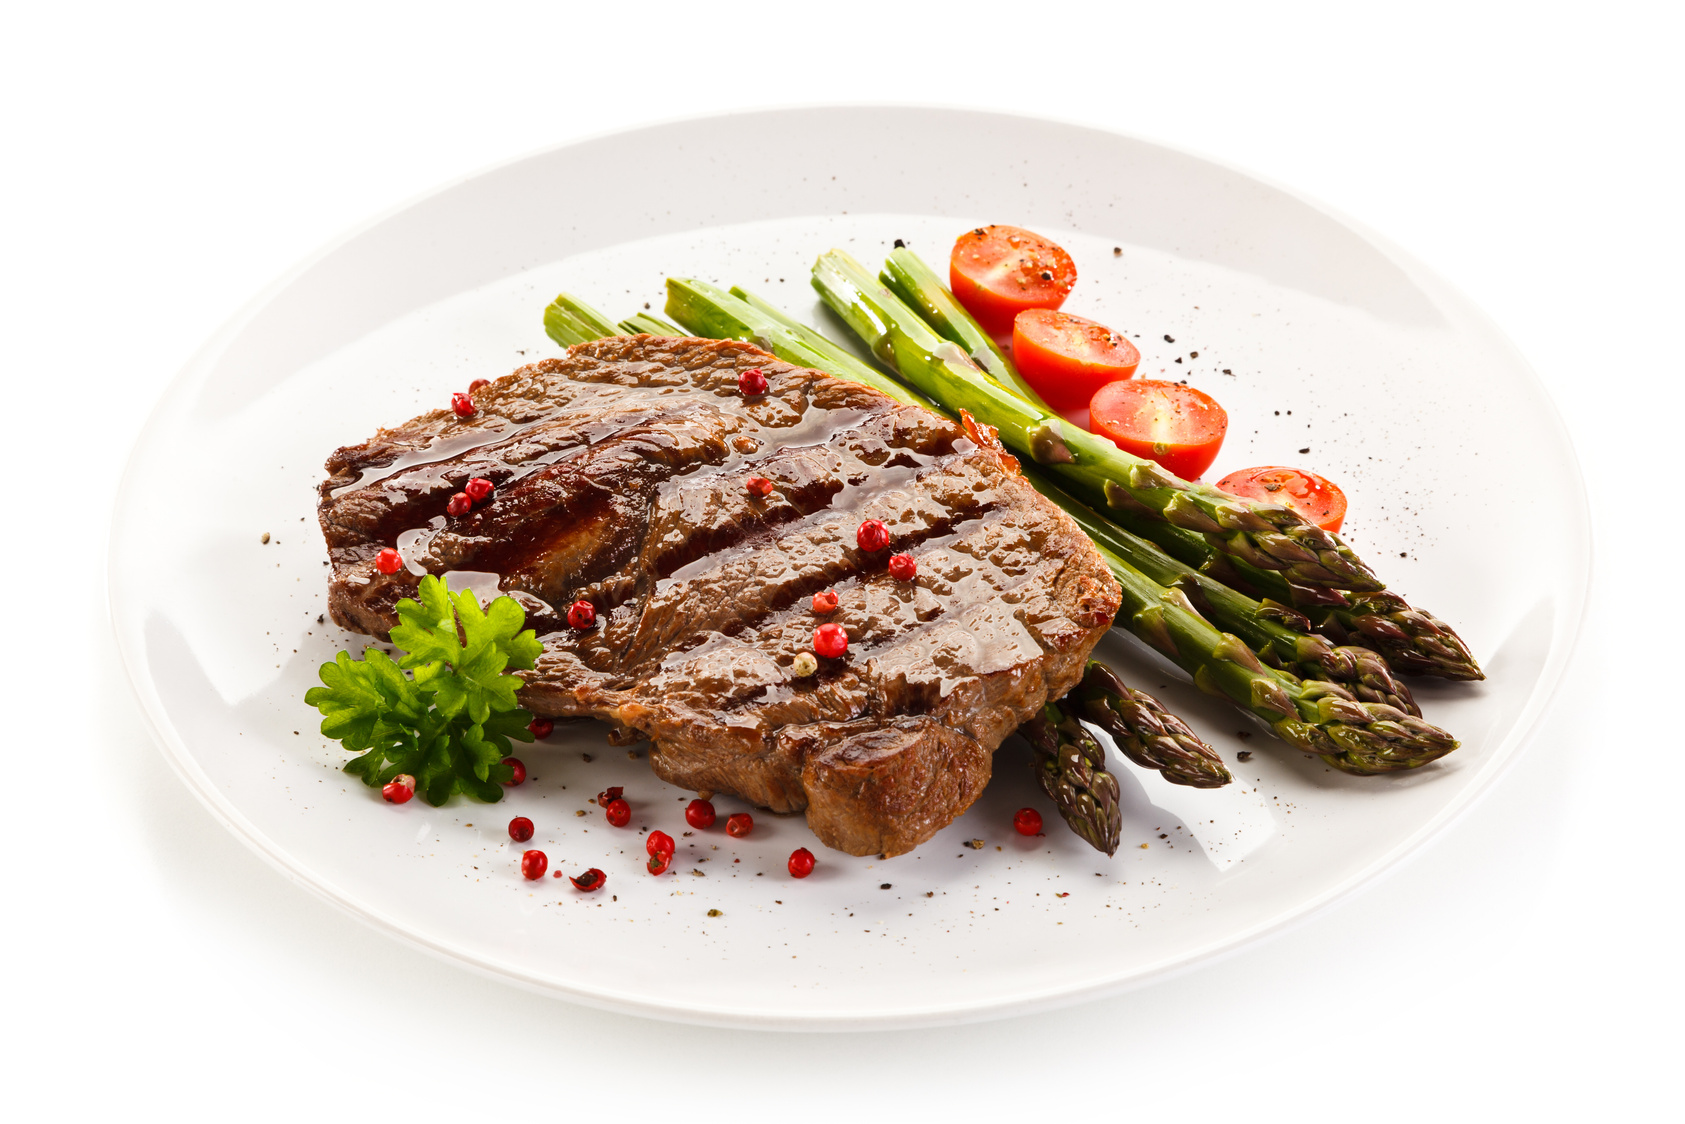 Grilled steak with asparagus